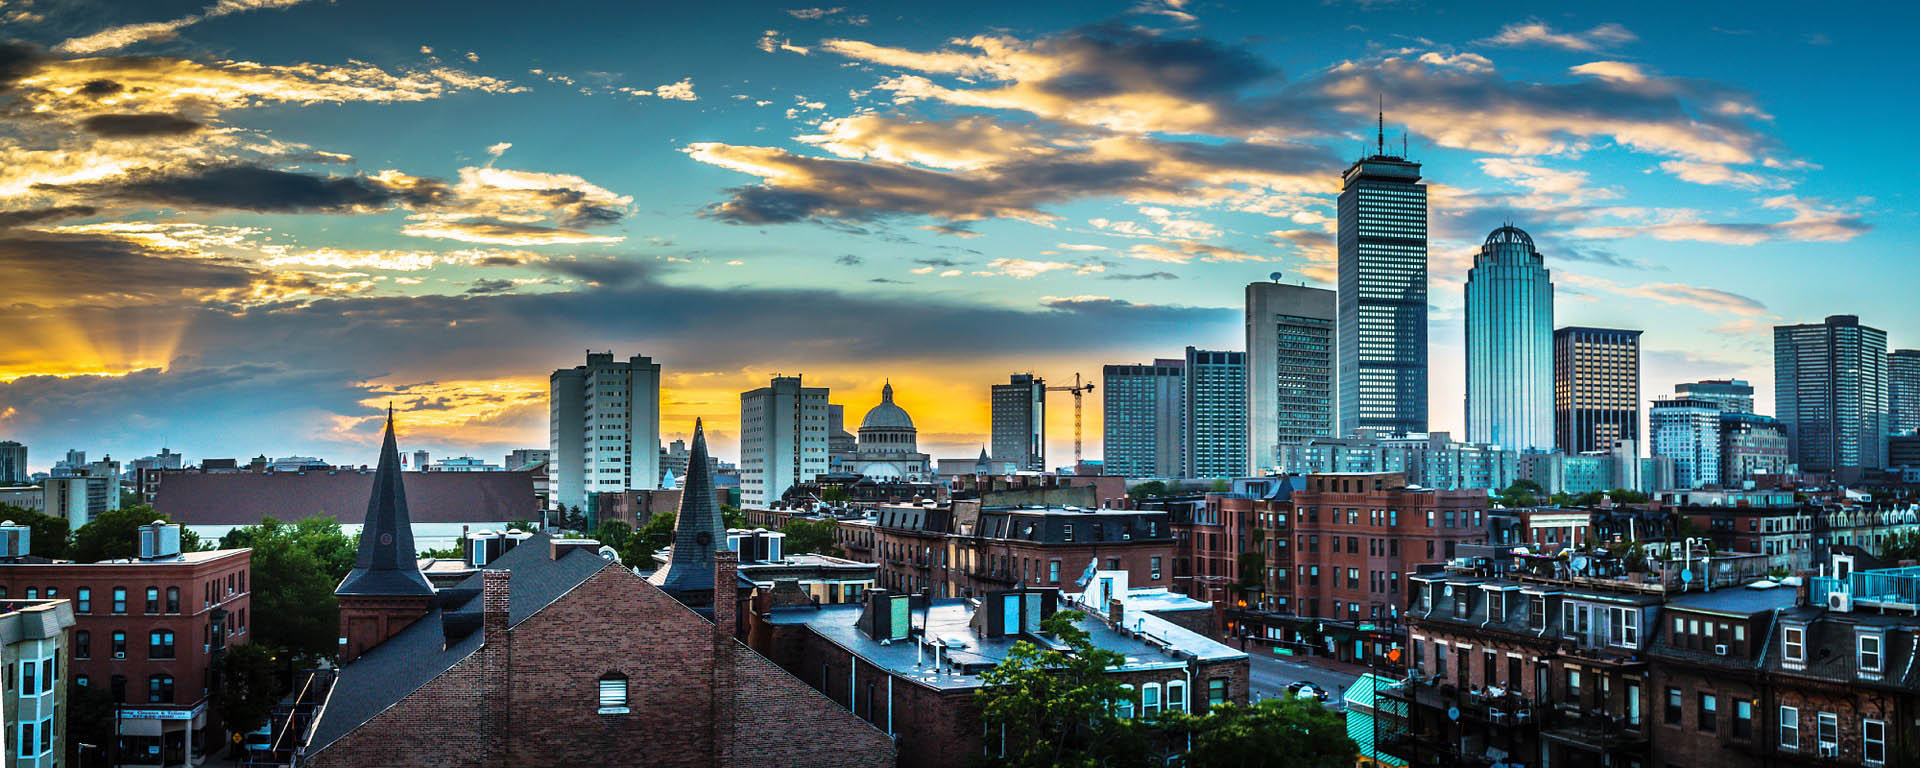 A glorious photo of the Boston skyline at sunset.